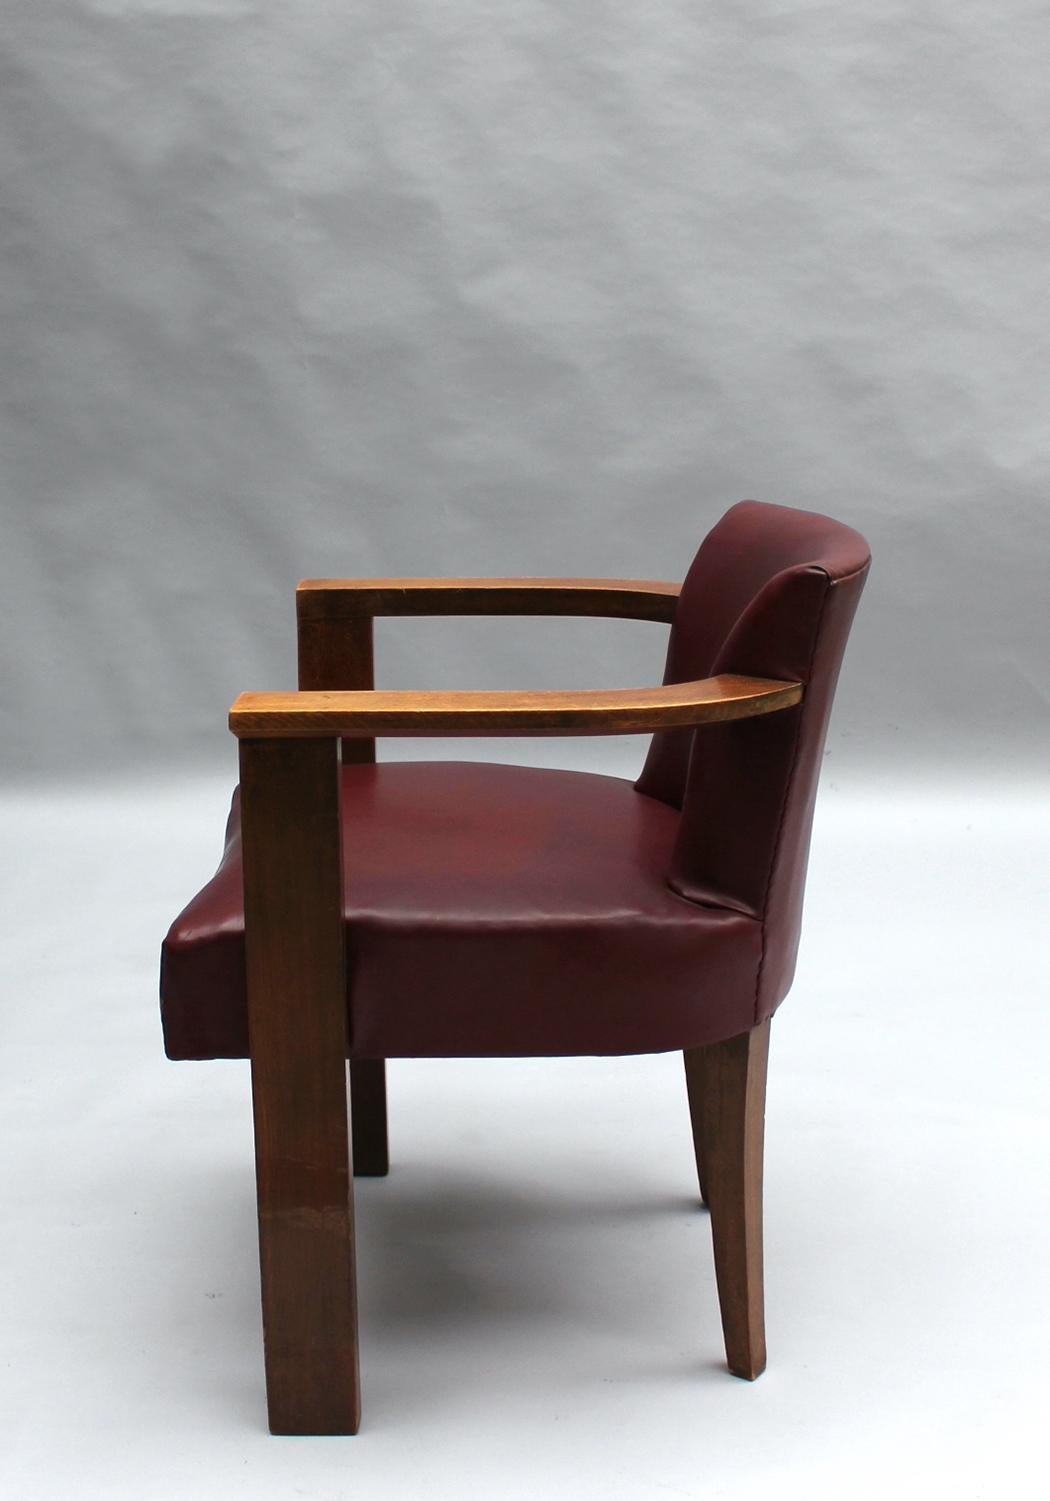 Mid-20th Century Fine French Art Deco Beech Wood Desk Chair For Sale